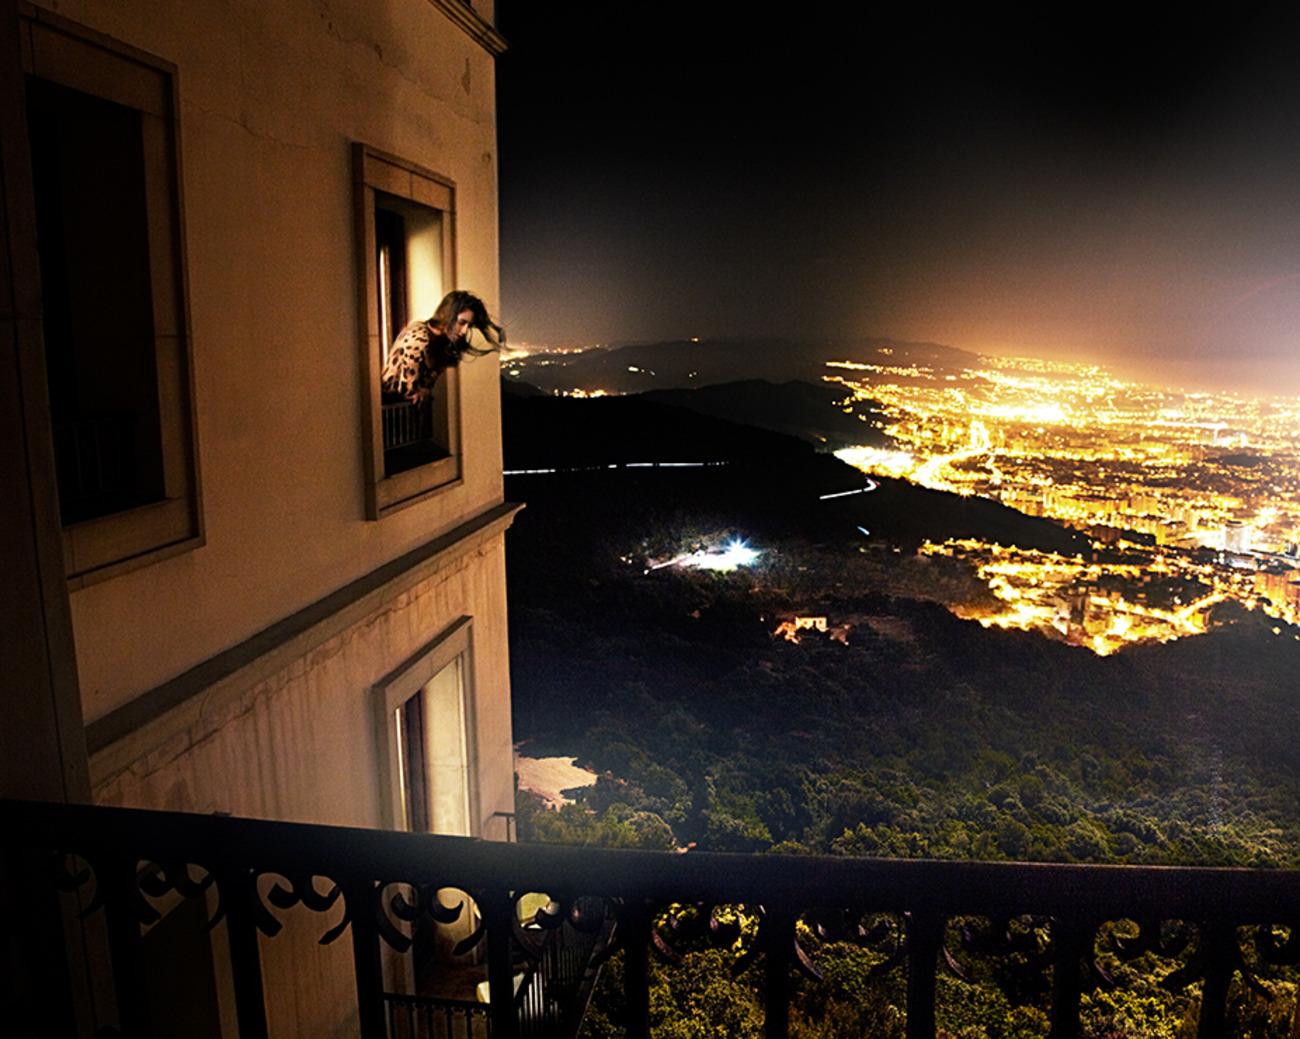 David Drebin - Room With A View, Photography 2010, Printed After